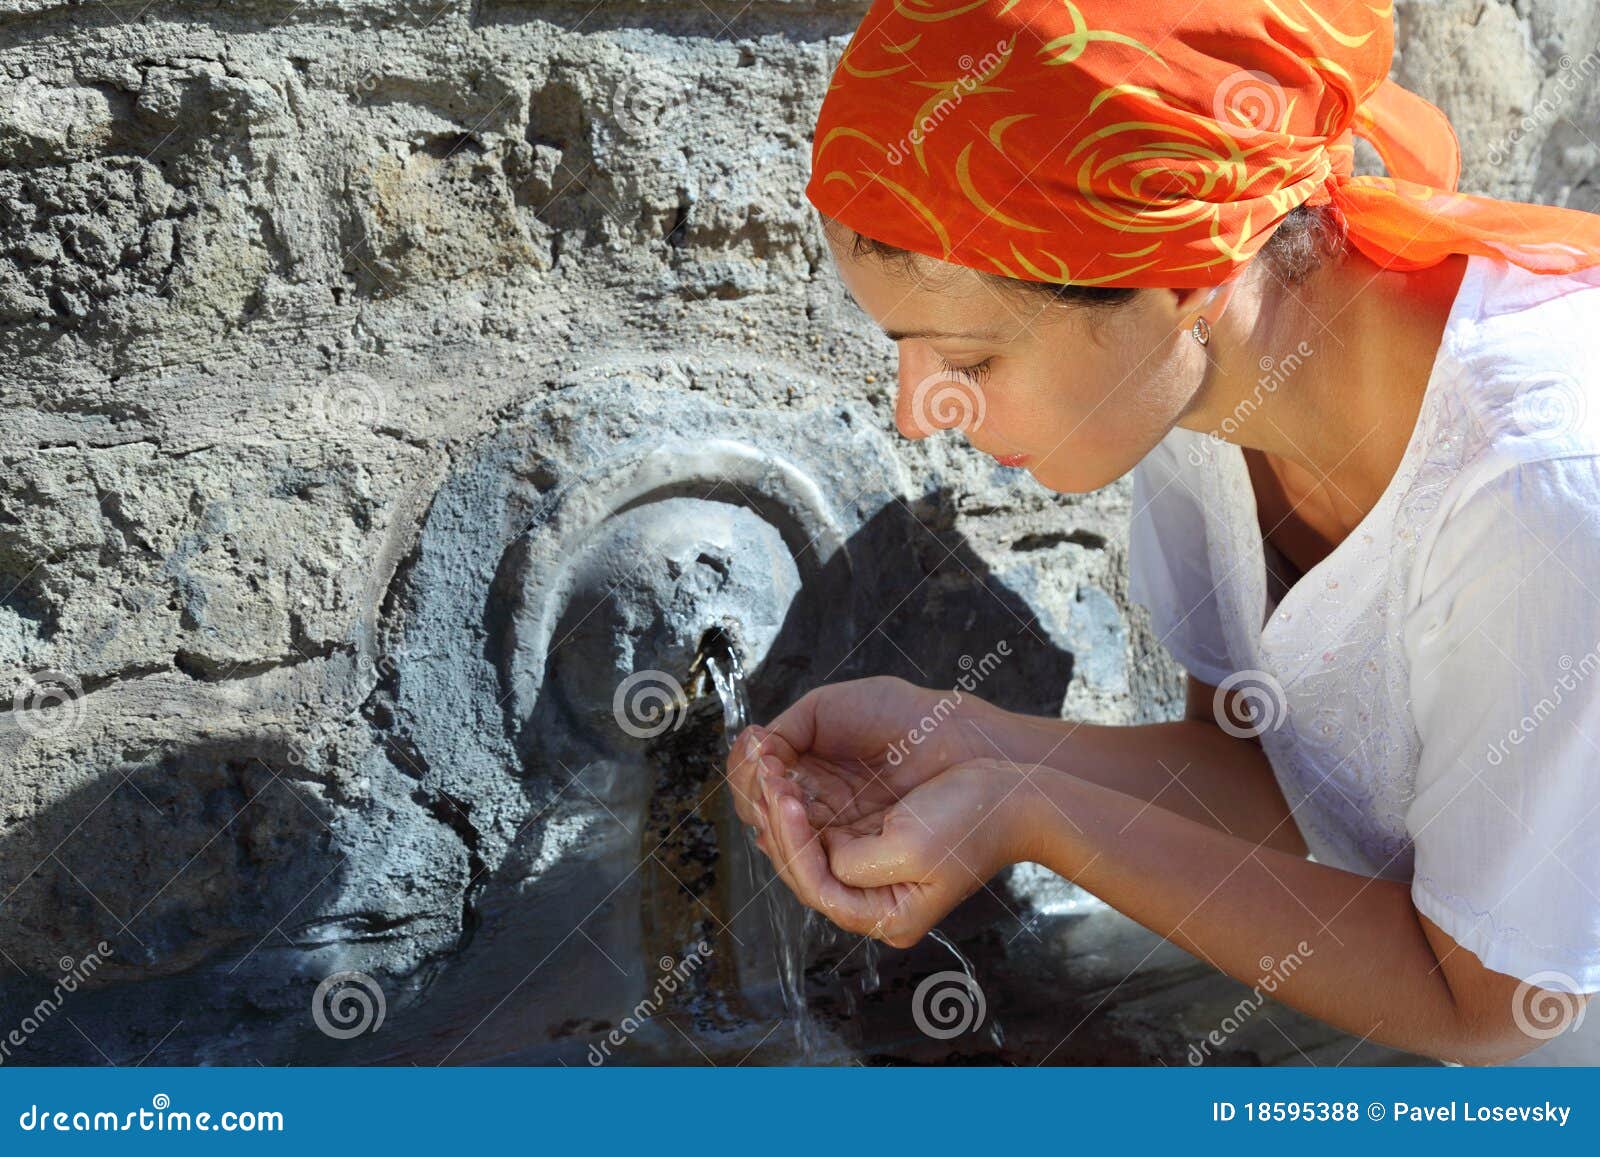 young woman in kerchief drinking water